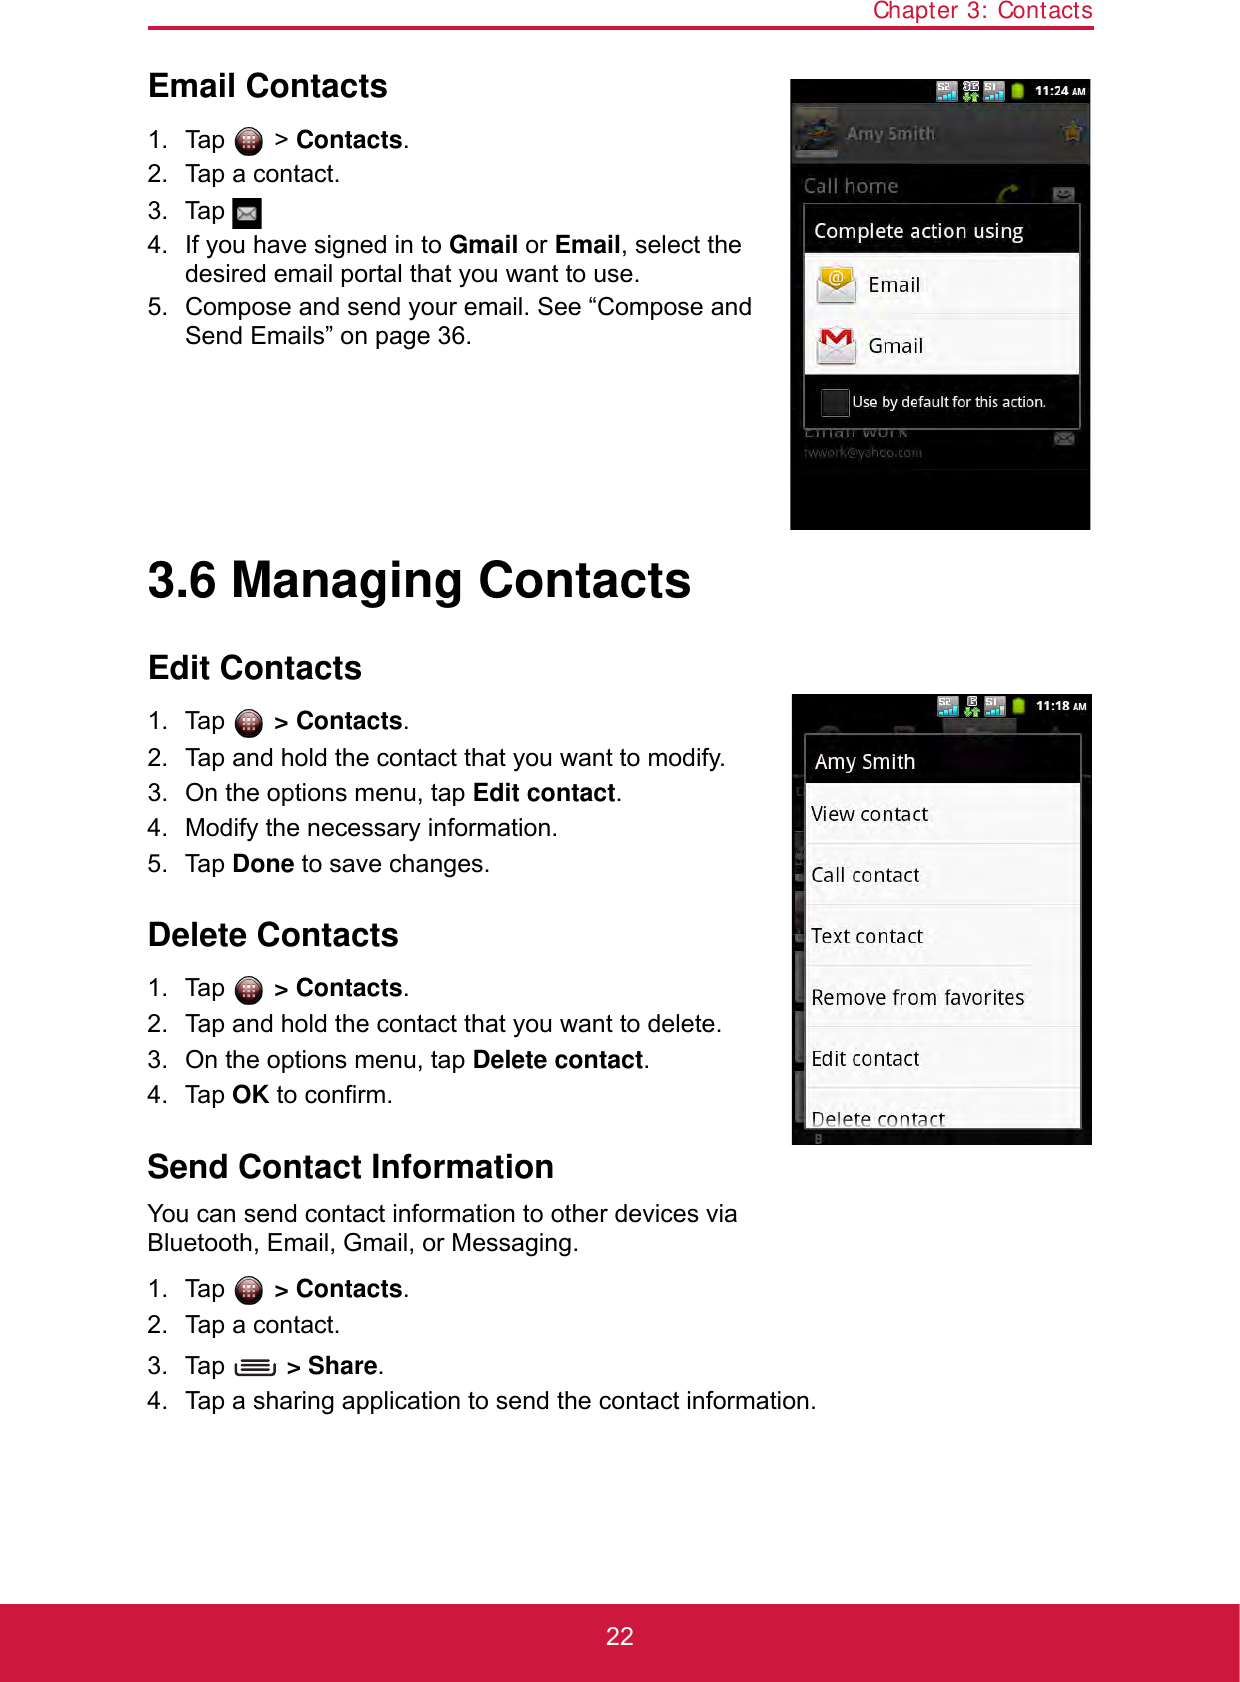 Chapter 3: Contacts22Email Contacts1. Tap  &gt; Contacts.2. Tap a contact.3. Tap .4. If you have signed in to Gmail or Email, select the desired email portal that you want to use.5. Compose and send your email. See “Compose and Send Emails” on page 36.3.6 Managing ContactsEdit Contacts1. Tap  &gt; Contacts.2. Tap and hold the contact that you want to modify.3. On the options menu, tap Edit contact.4. Modify the necessary information.5. Tap Done to save changes.Delete Contacts1. Tap  &gt; Contacts.2. Tap and hold the contact that you want to delete.3. On the options menu, tap Delete contact.4. Tap OK to confirm.Send Contact InformationYou can send contact information to other devices via Bluetooth, Email, Gmail, or Messaging.1. Tap   &gt; Contacts.2. Tap a contact.3. Tap   &gt; Share. 4. Tap a sharing application to send the contact information.